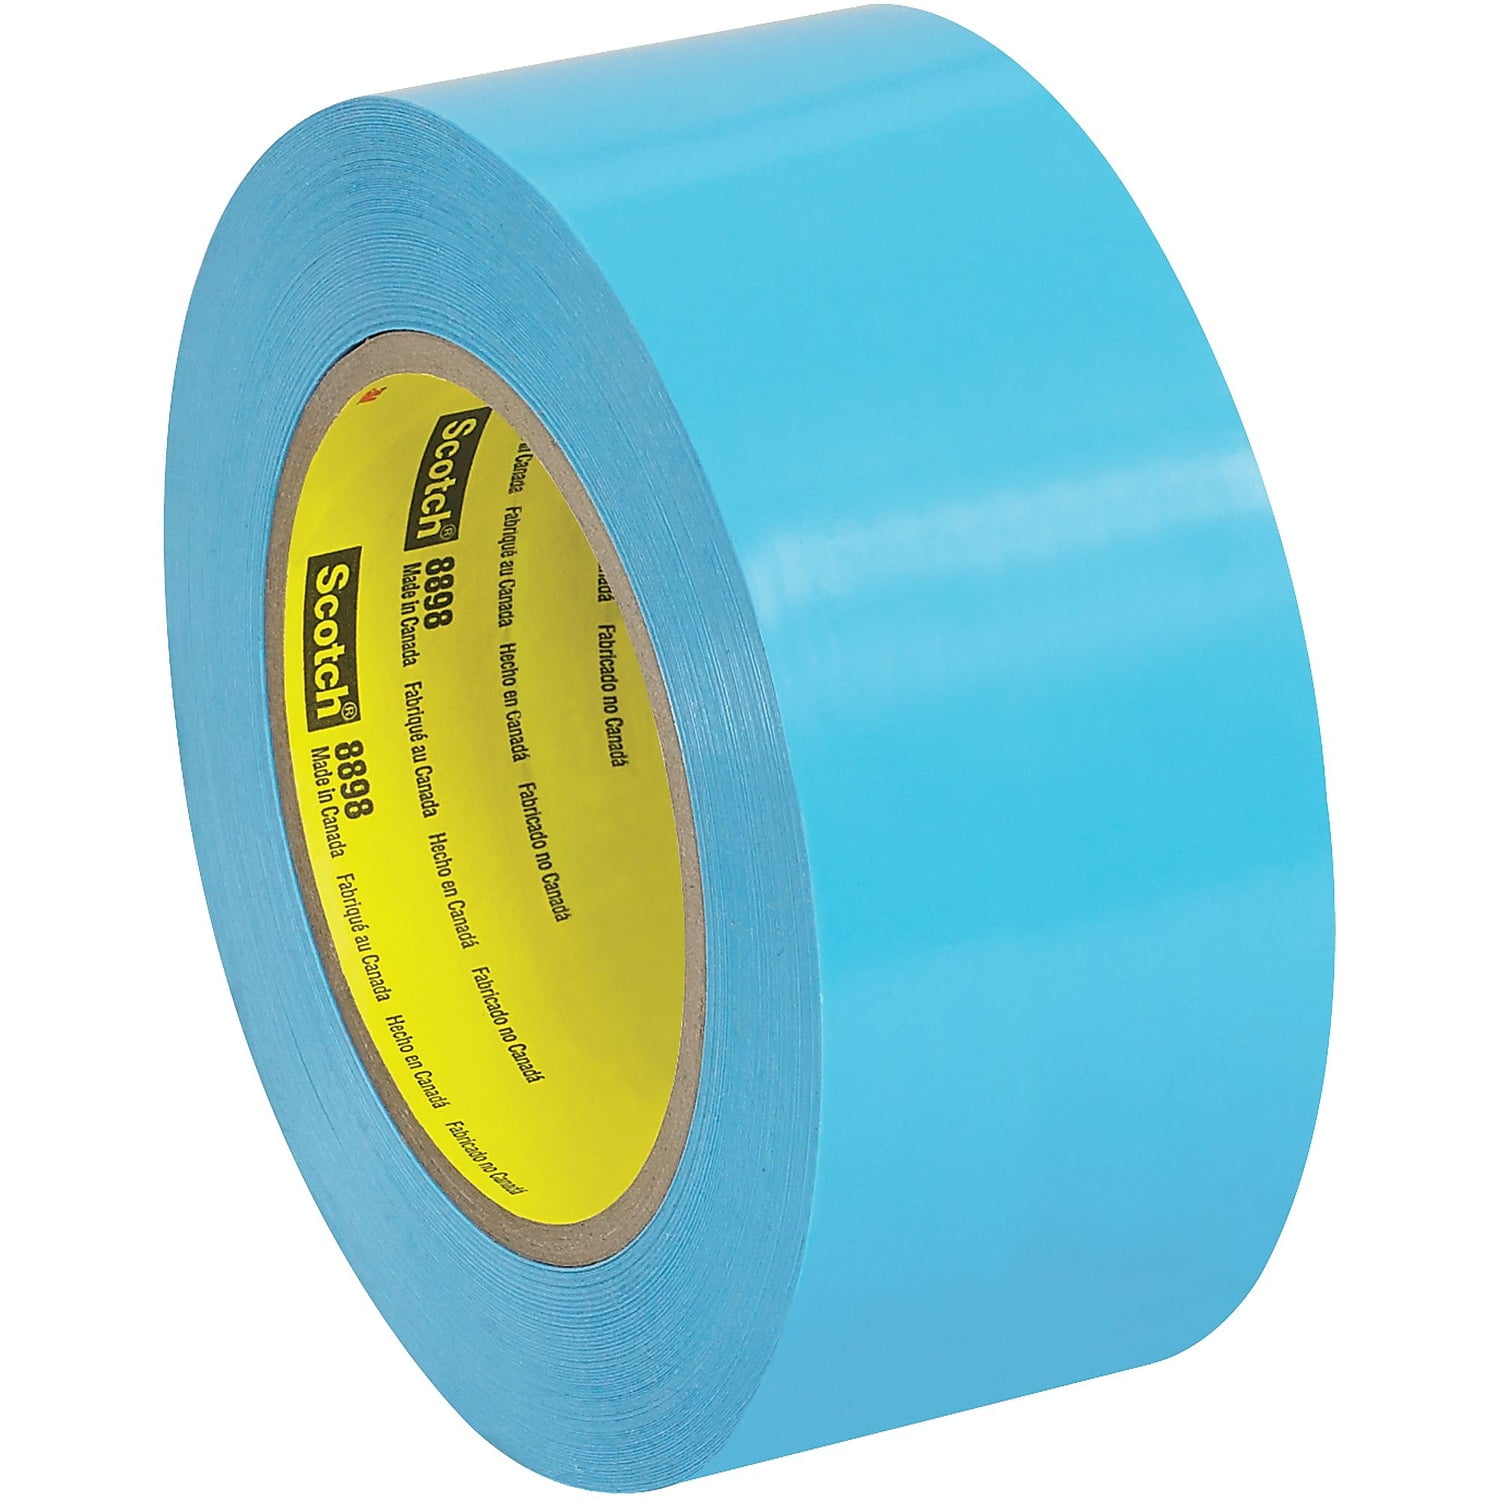 Scotch T9178898 2 In. X 60 Yards 8898 Poly Strapping Tape, Blue - Case Of 24